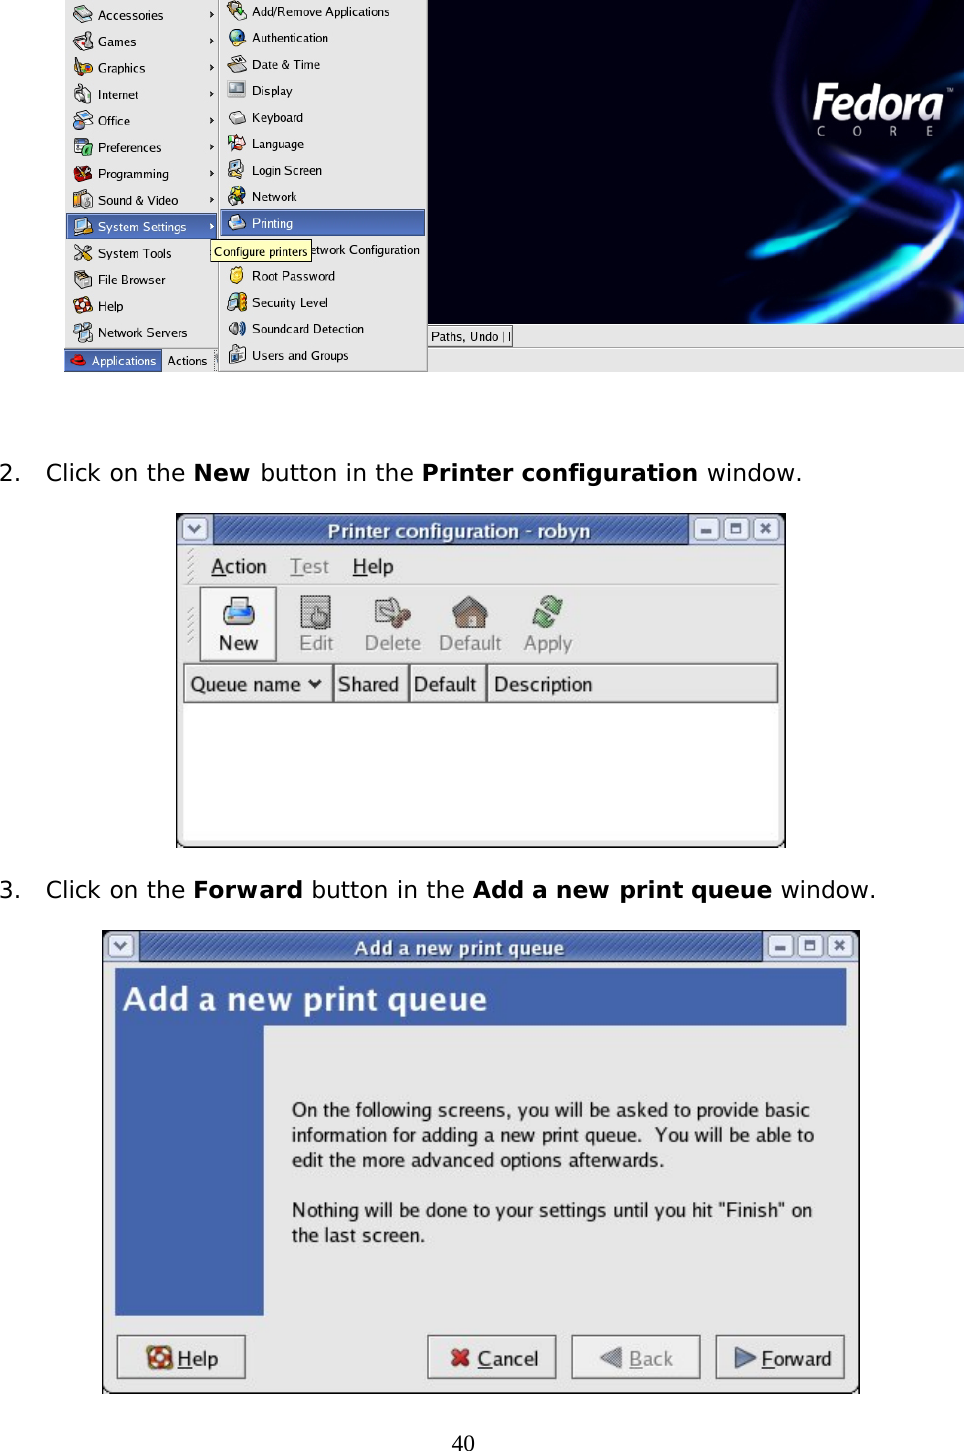     40  2. Click on the New button in the Printer configuration window.  3. Click on the Forward button in the Add a new print queue window.  